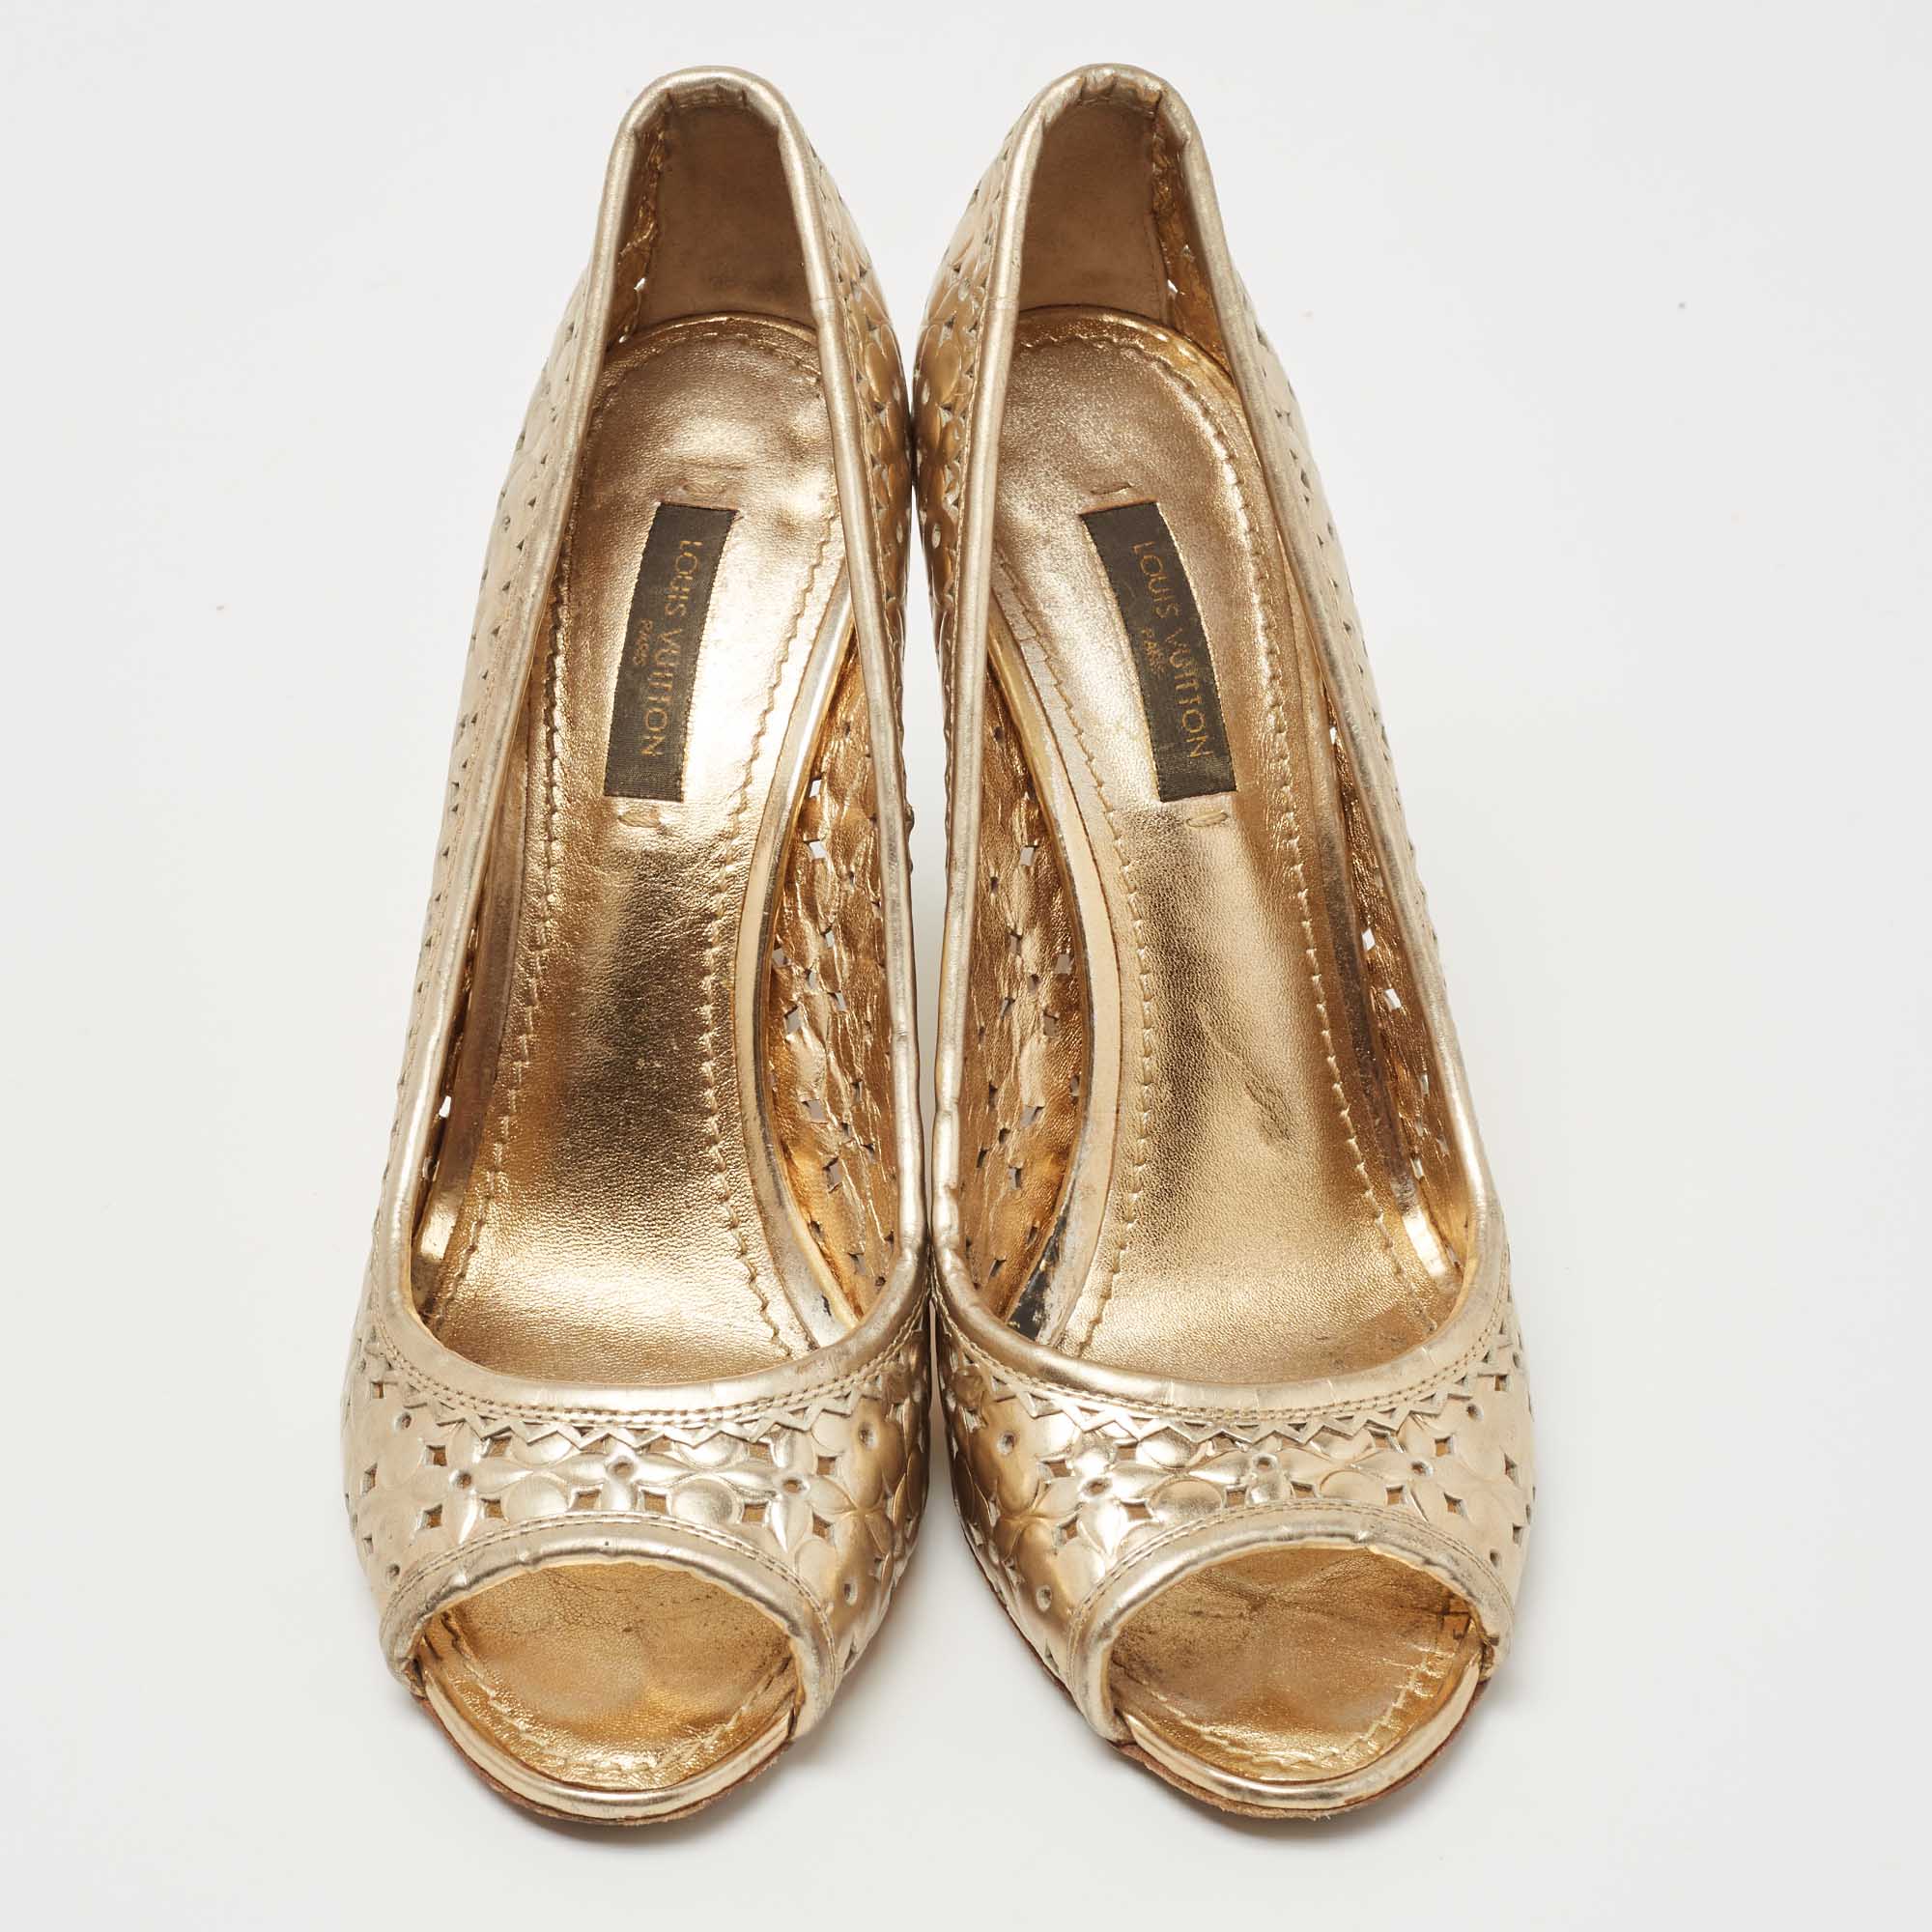 Louis Vuitton Gold Leather Stand By Me Wedge Pumps Size 36.5